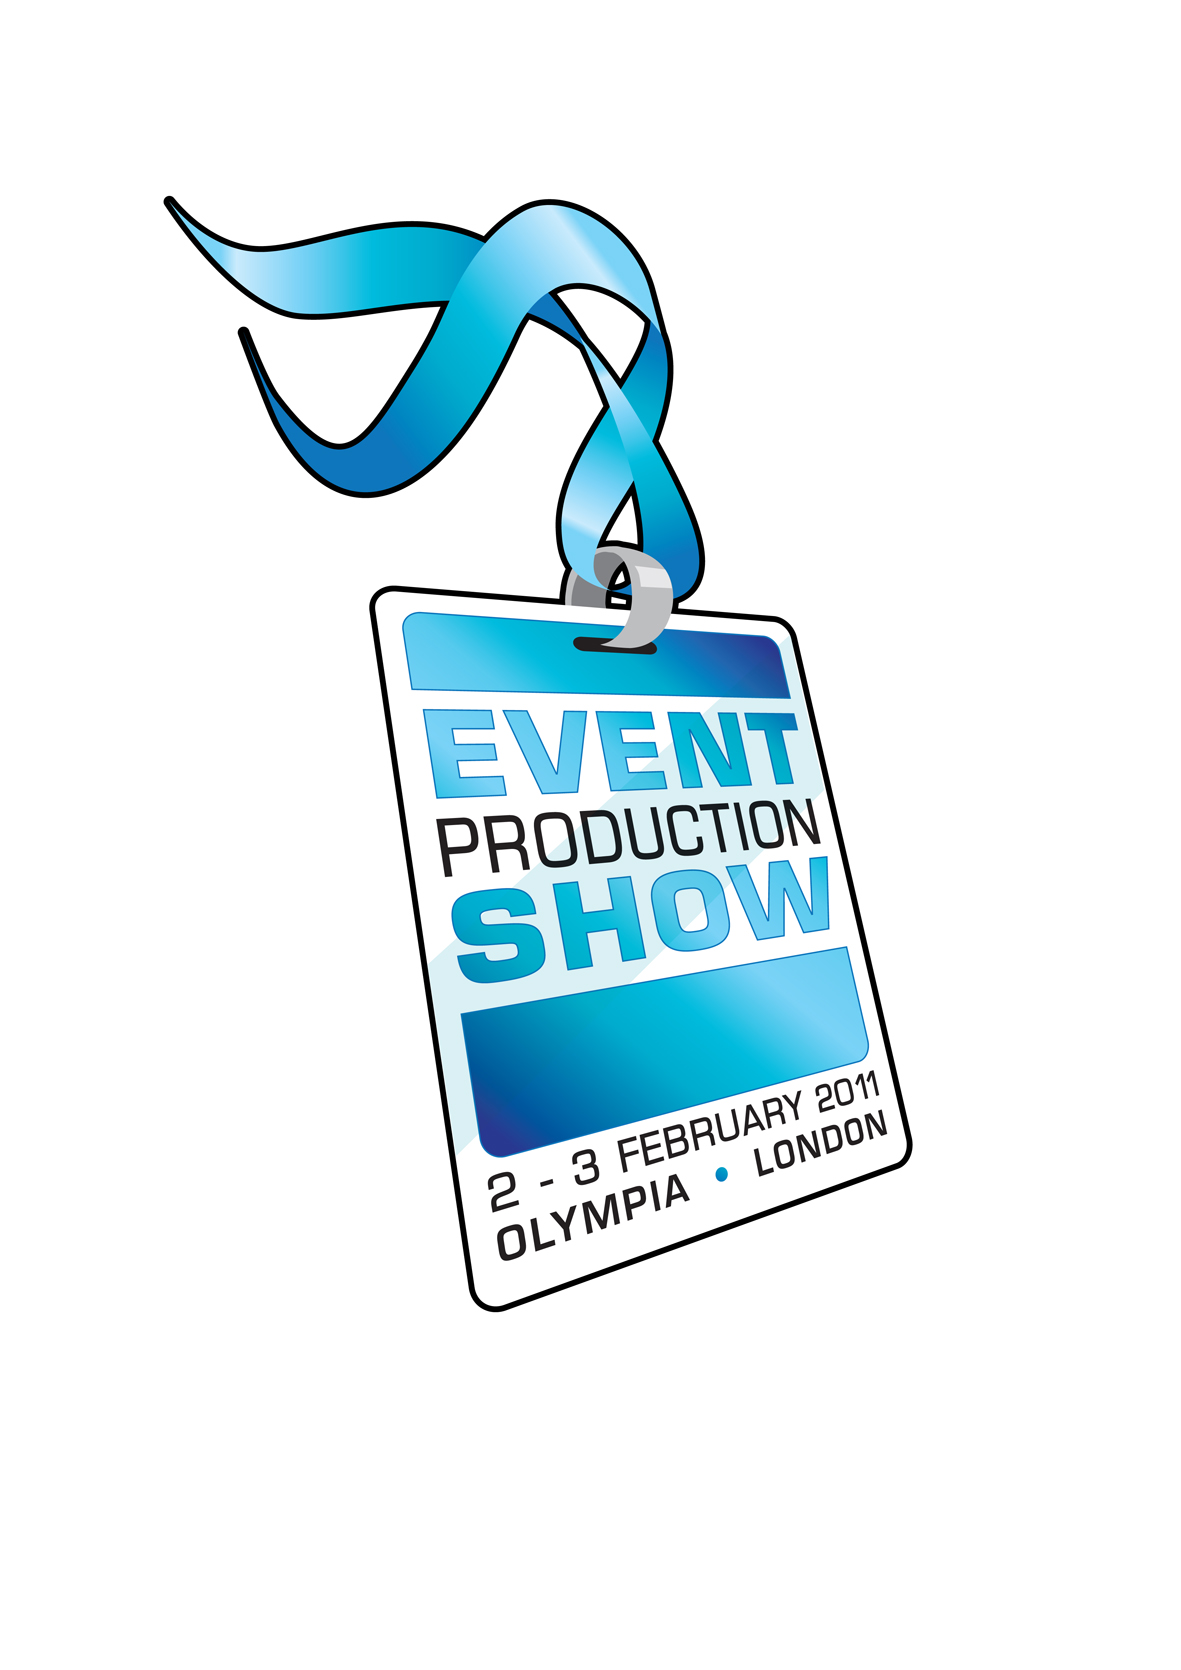 Qdos will Launch a Brand New Product at The Event Production Show